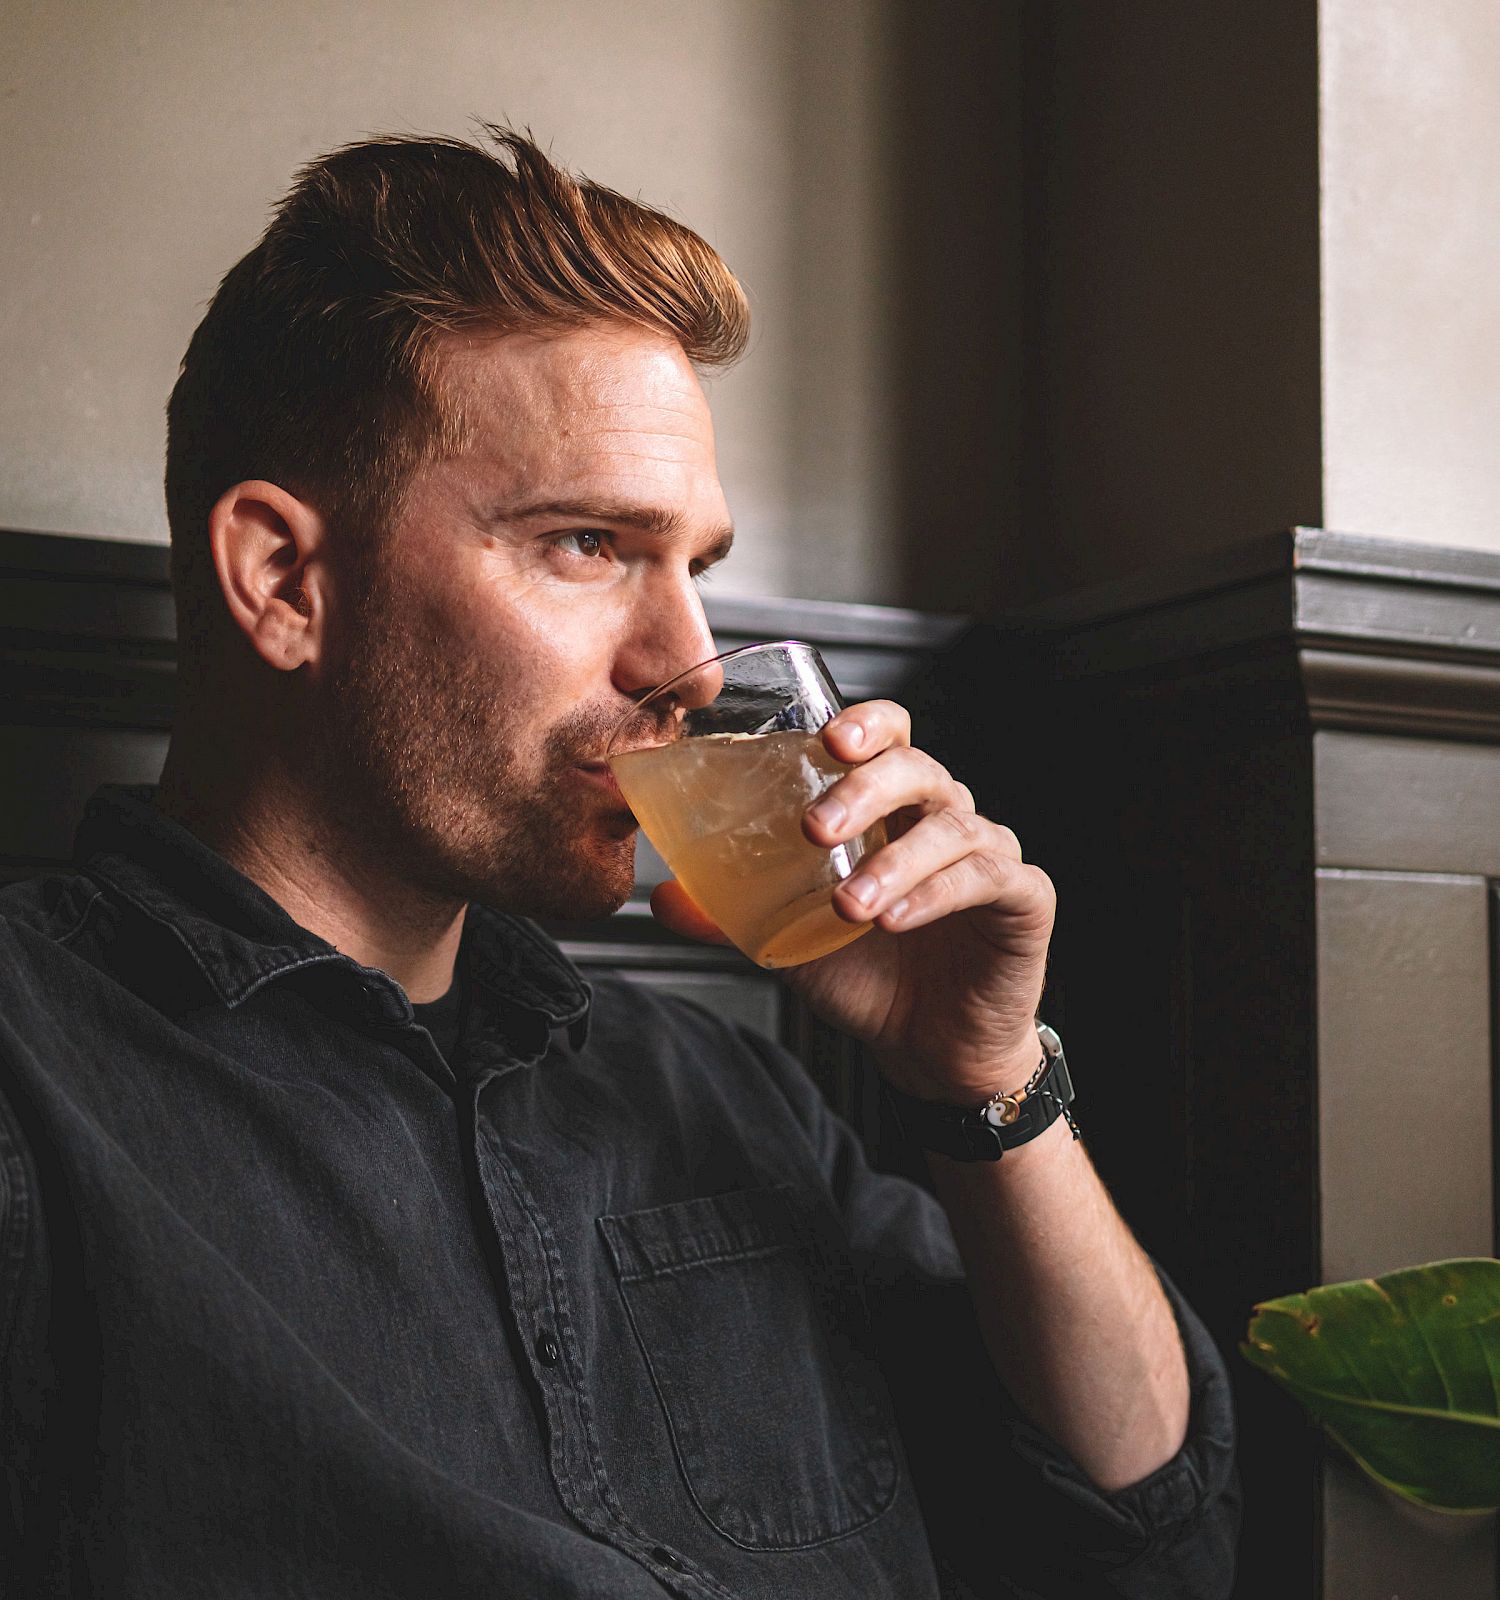 A person with short hair and a beard is seated by a window, drinking from a glass. They are wearing a dark shirt and have a calm expression.